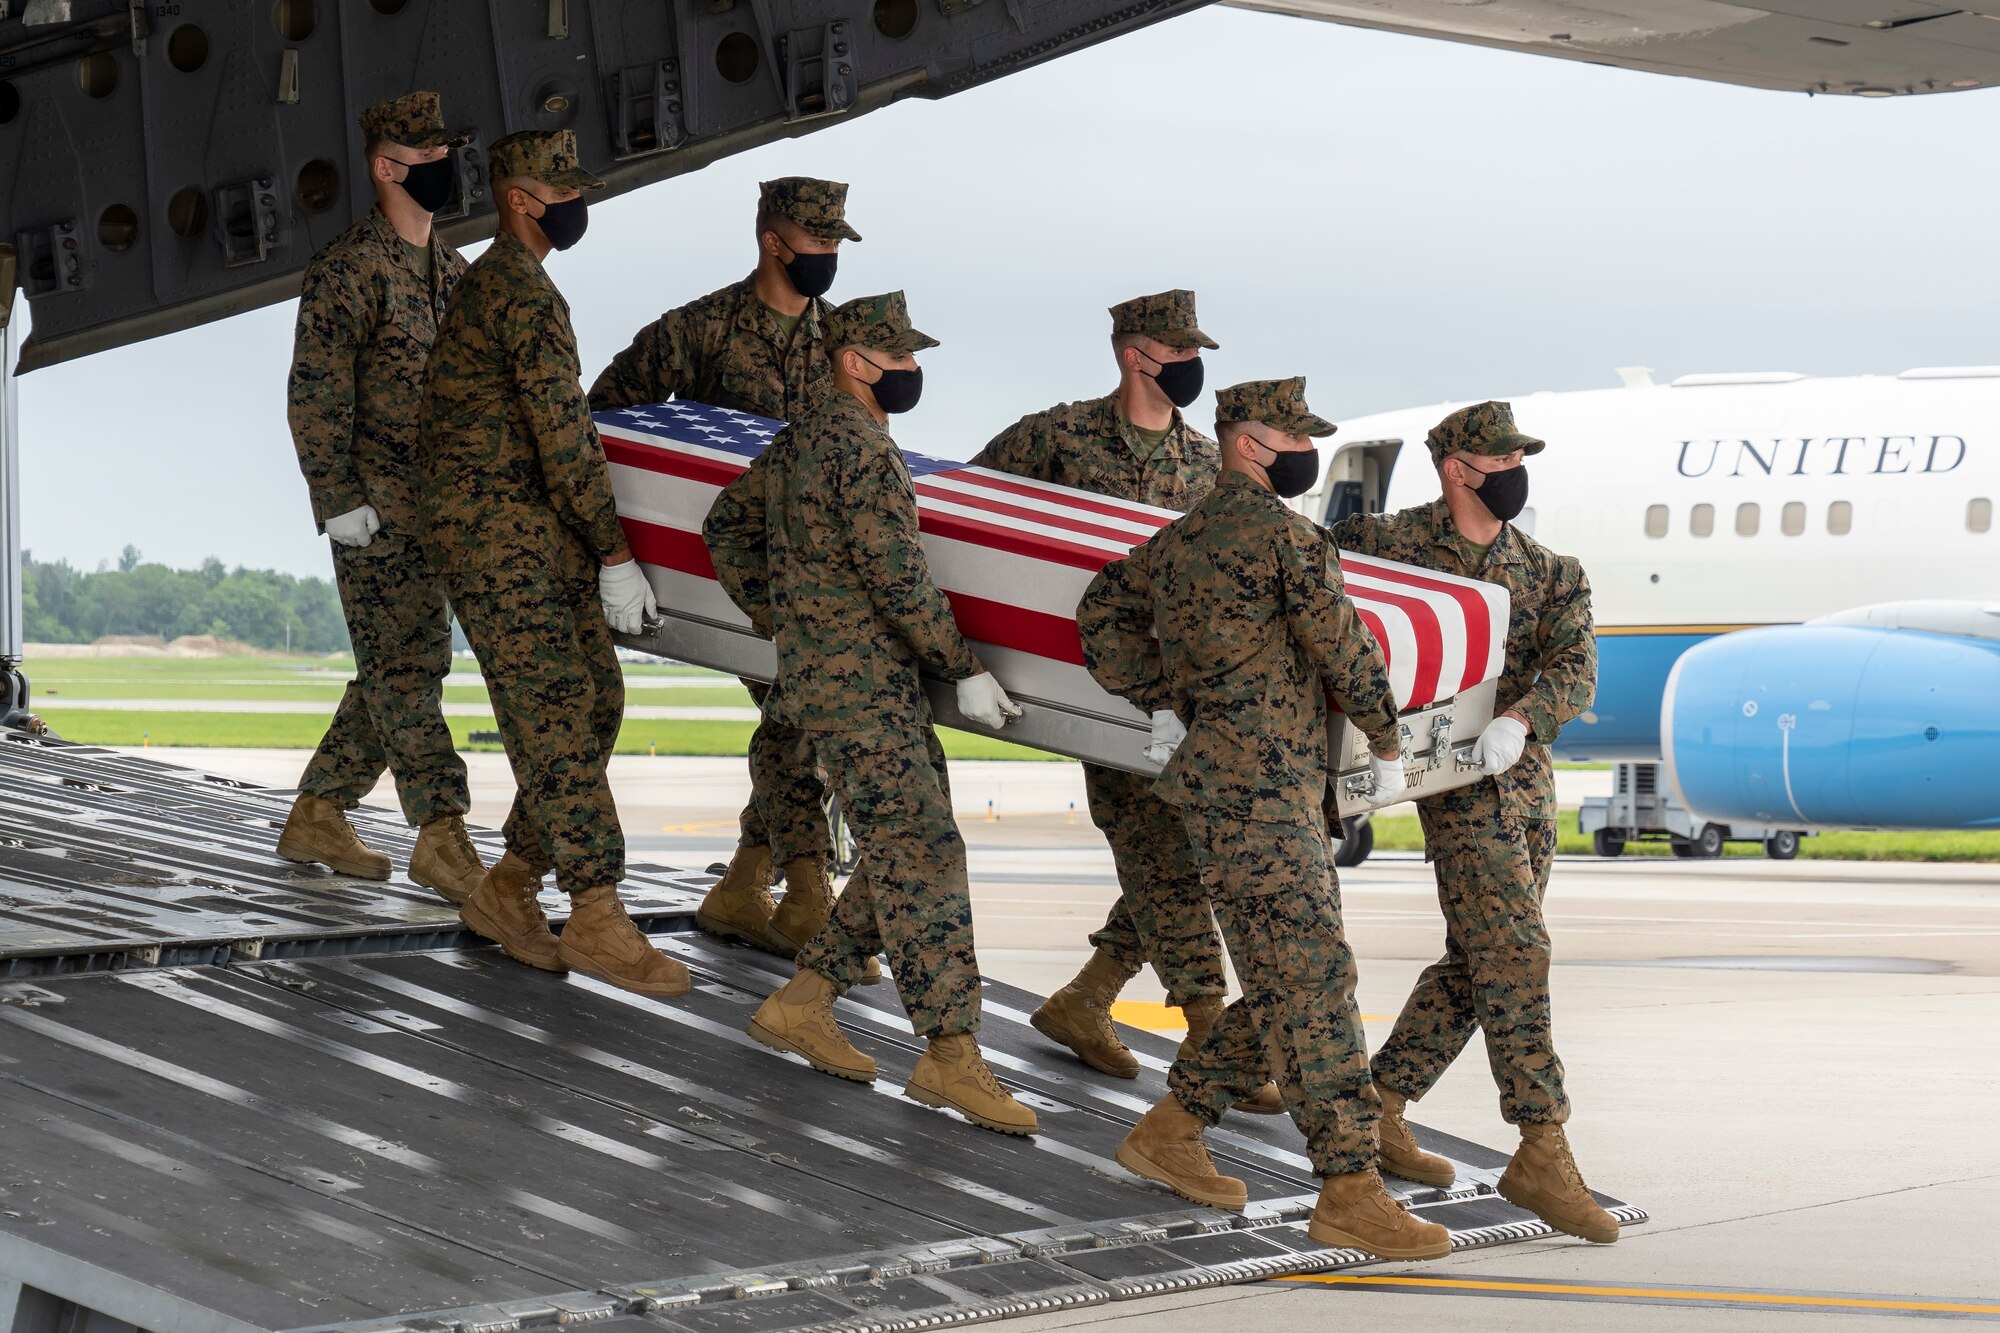 A U.S. Marine Corps carry team transfers the remains of Marine Corps Sgt. Nicole L. Gee of Sacramento, California, August 29, 2021 at Dover Air Force Base, Delaware. Gee was assigned to 2D Marine Logistics Group, II Marine Expeditionary Force, Camp Lejeune, North Carolina.  (U.S. Air Force photo by Jason Minto)